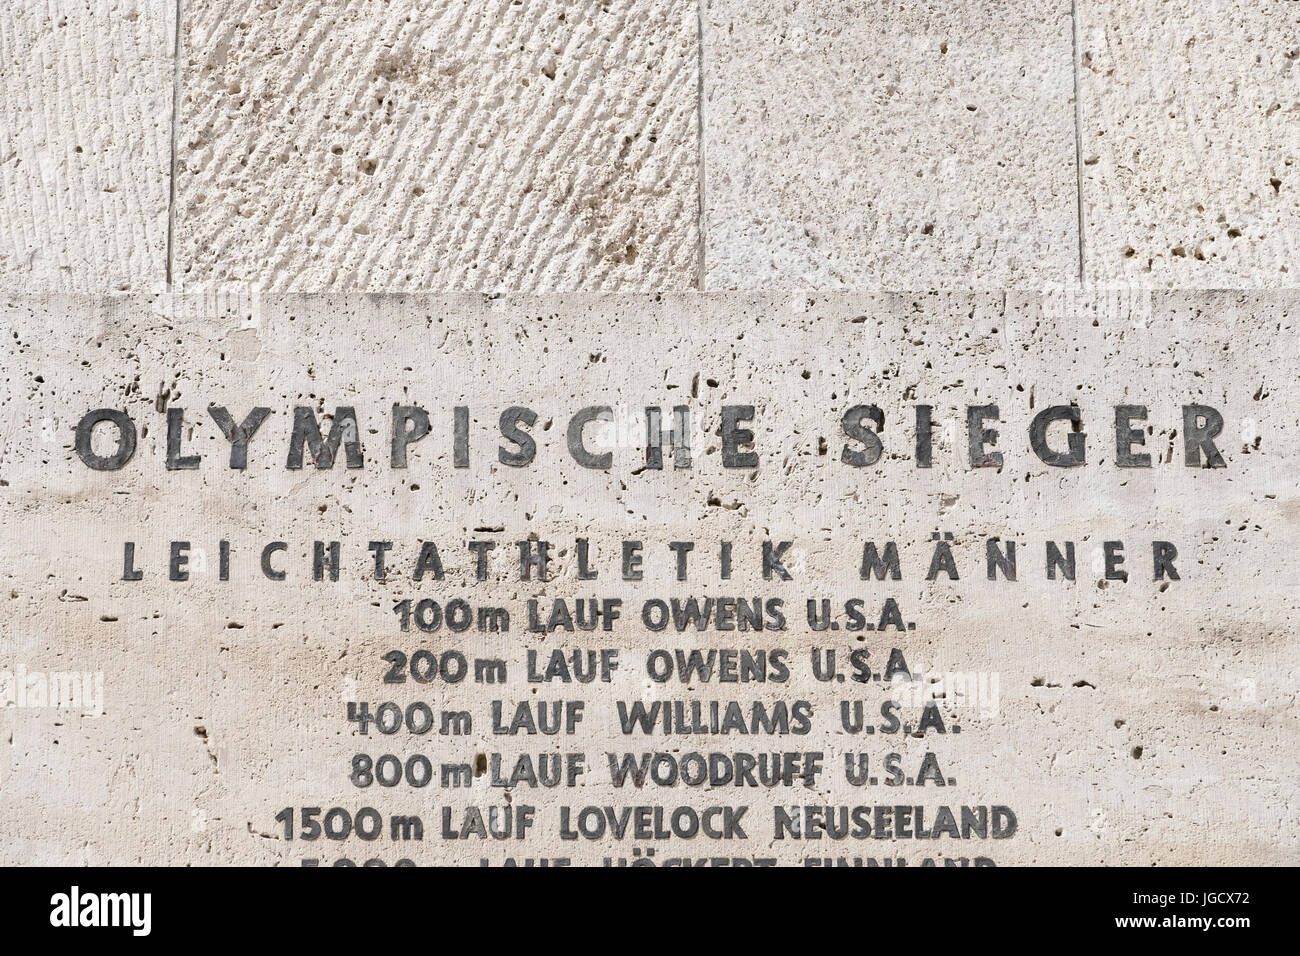 List of winners of 1936 Berlin Olympic Games with Jesse Owens name prominent Olympiastadion Olympic Stadium) in Berlin, Germany Stock Photo